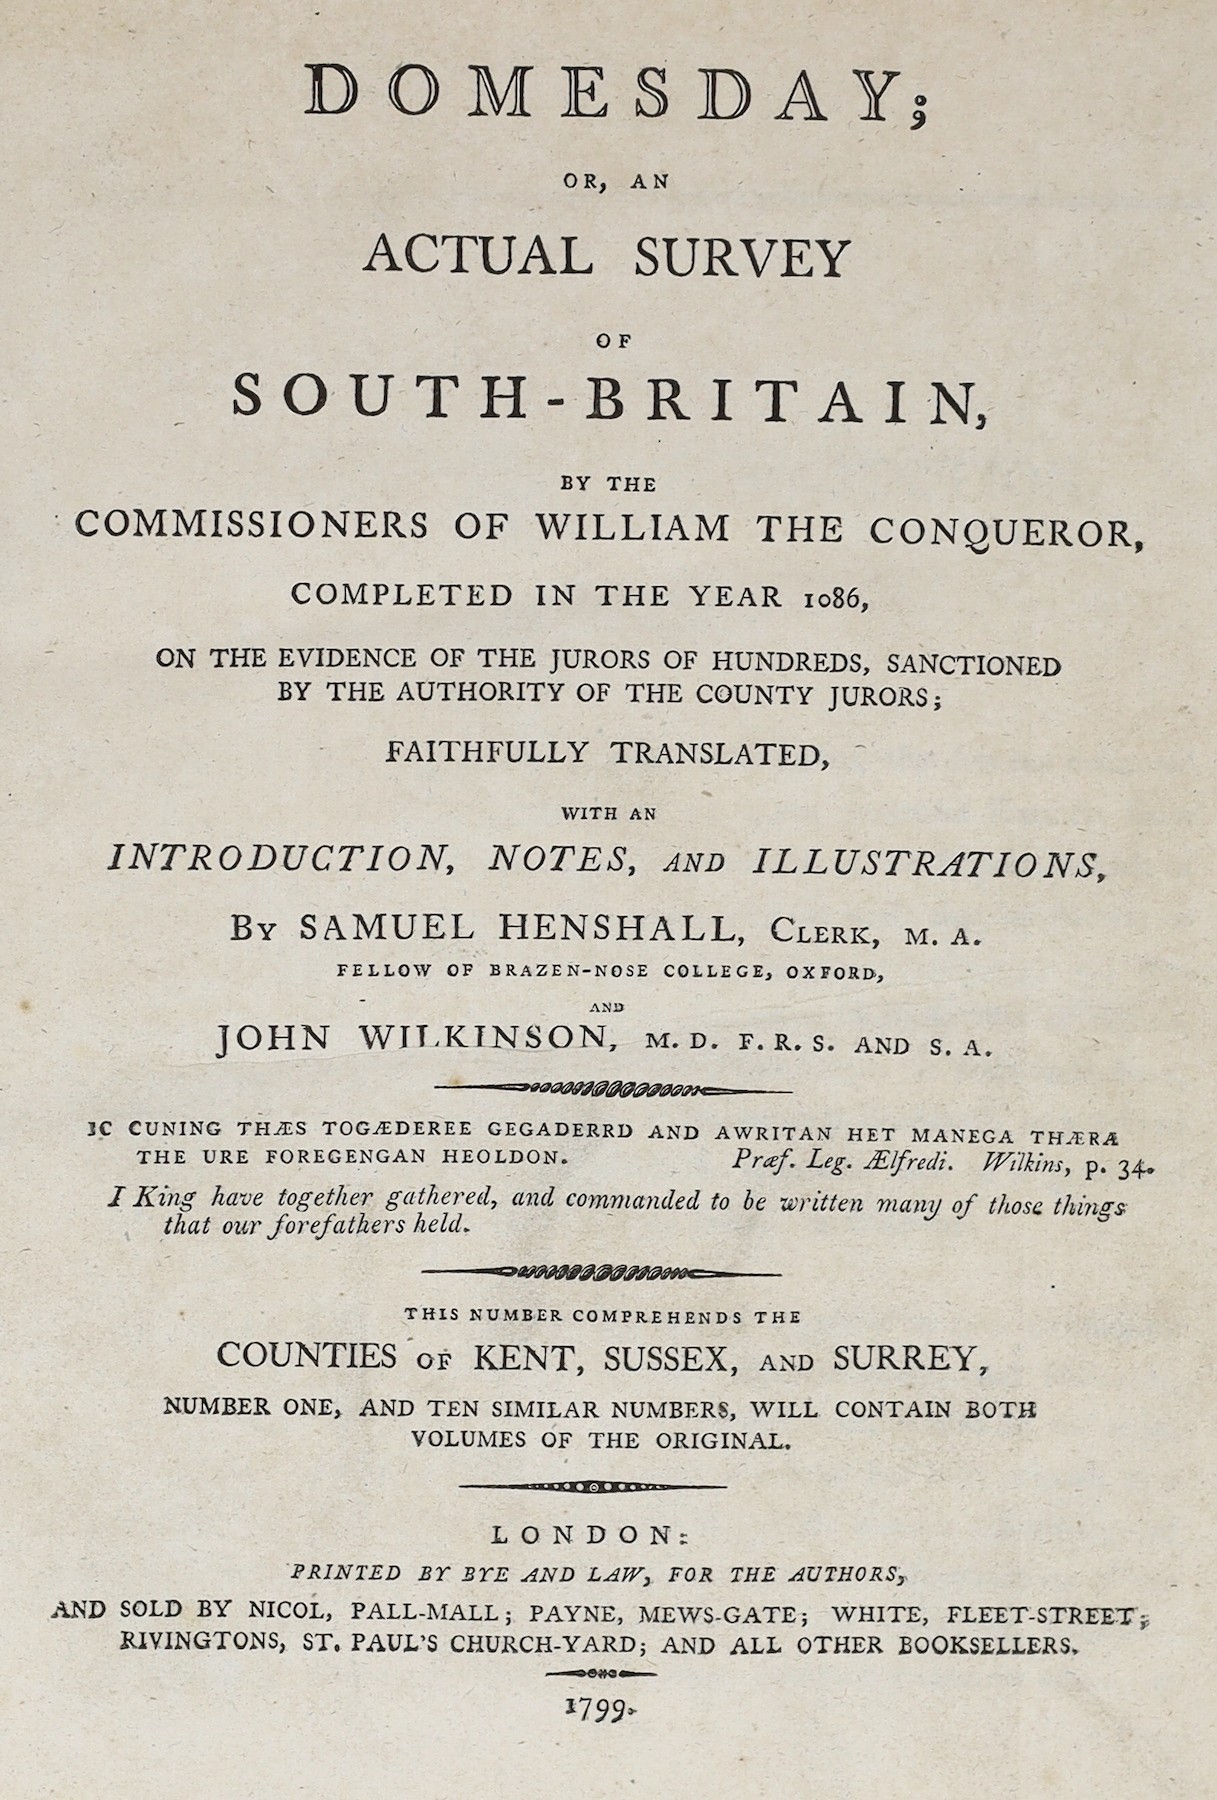 KENT: Domesday; or, an Actual Survey of South Britain, by the Commissioners of William the Conqueror....faithfully translated, with an introduction, notes, and illustrations, by Samuel Henshall and John Wilkinson.... Thi